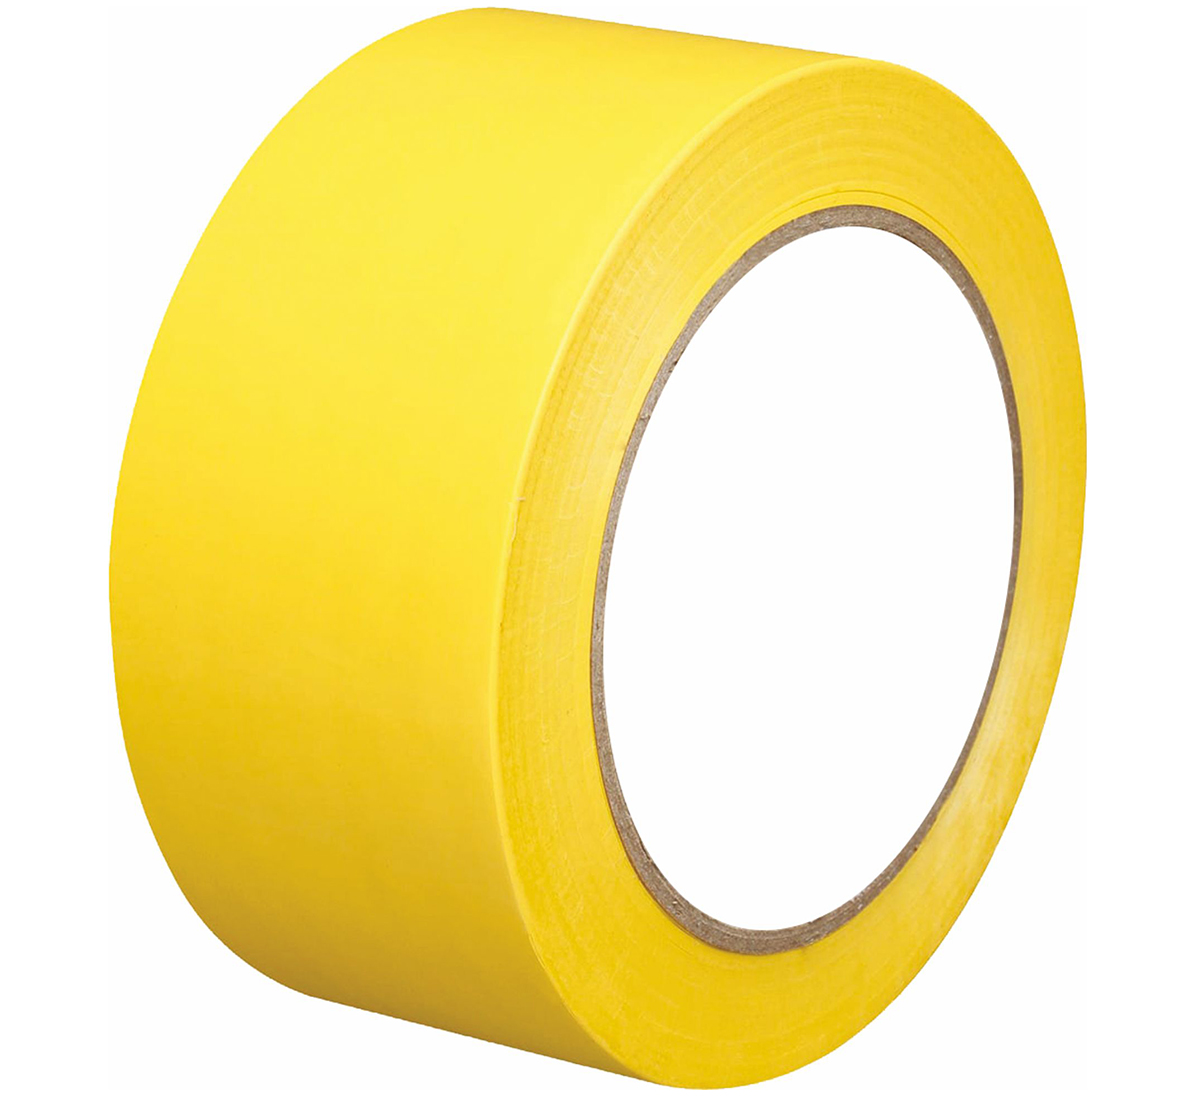 Yellow waterproof floor marking tape with 2 inch size